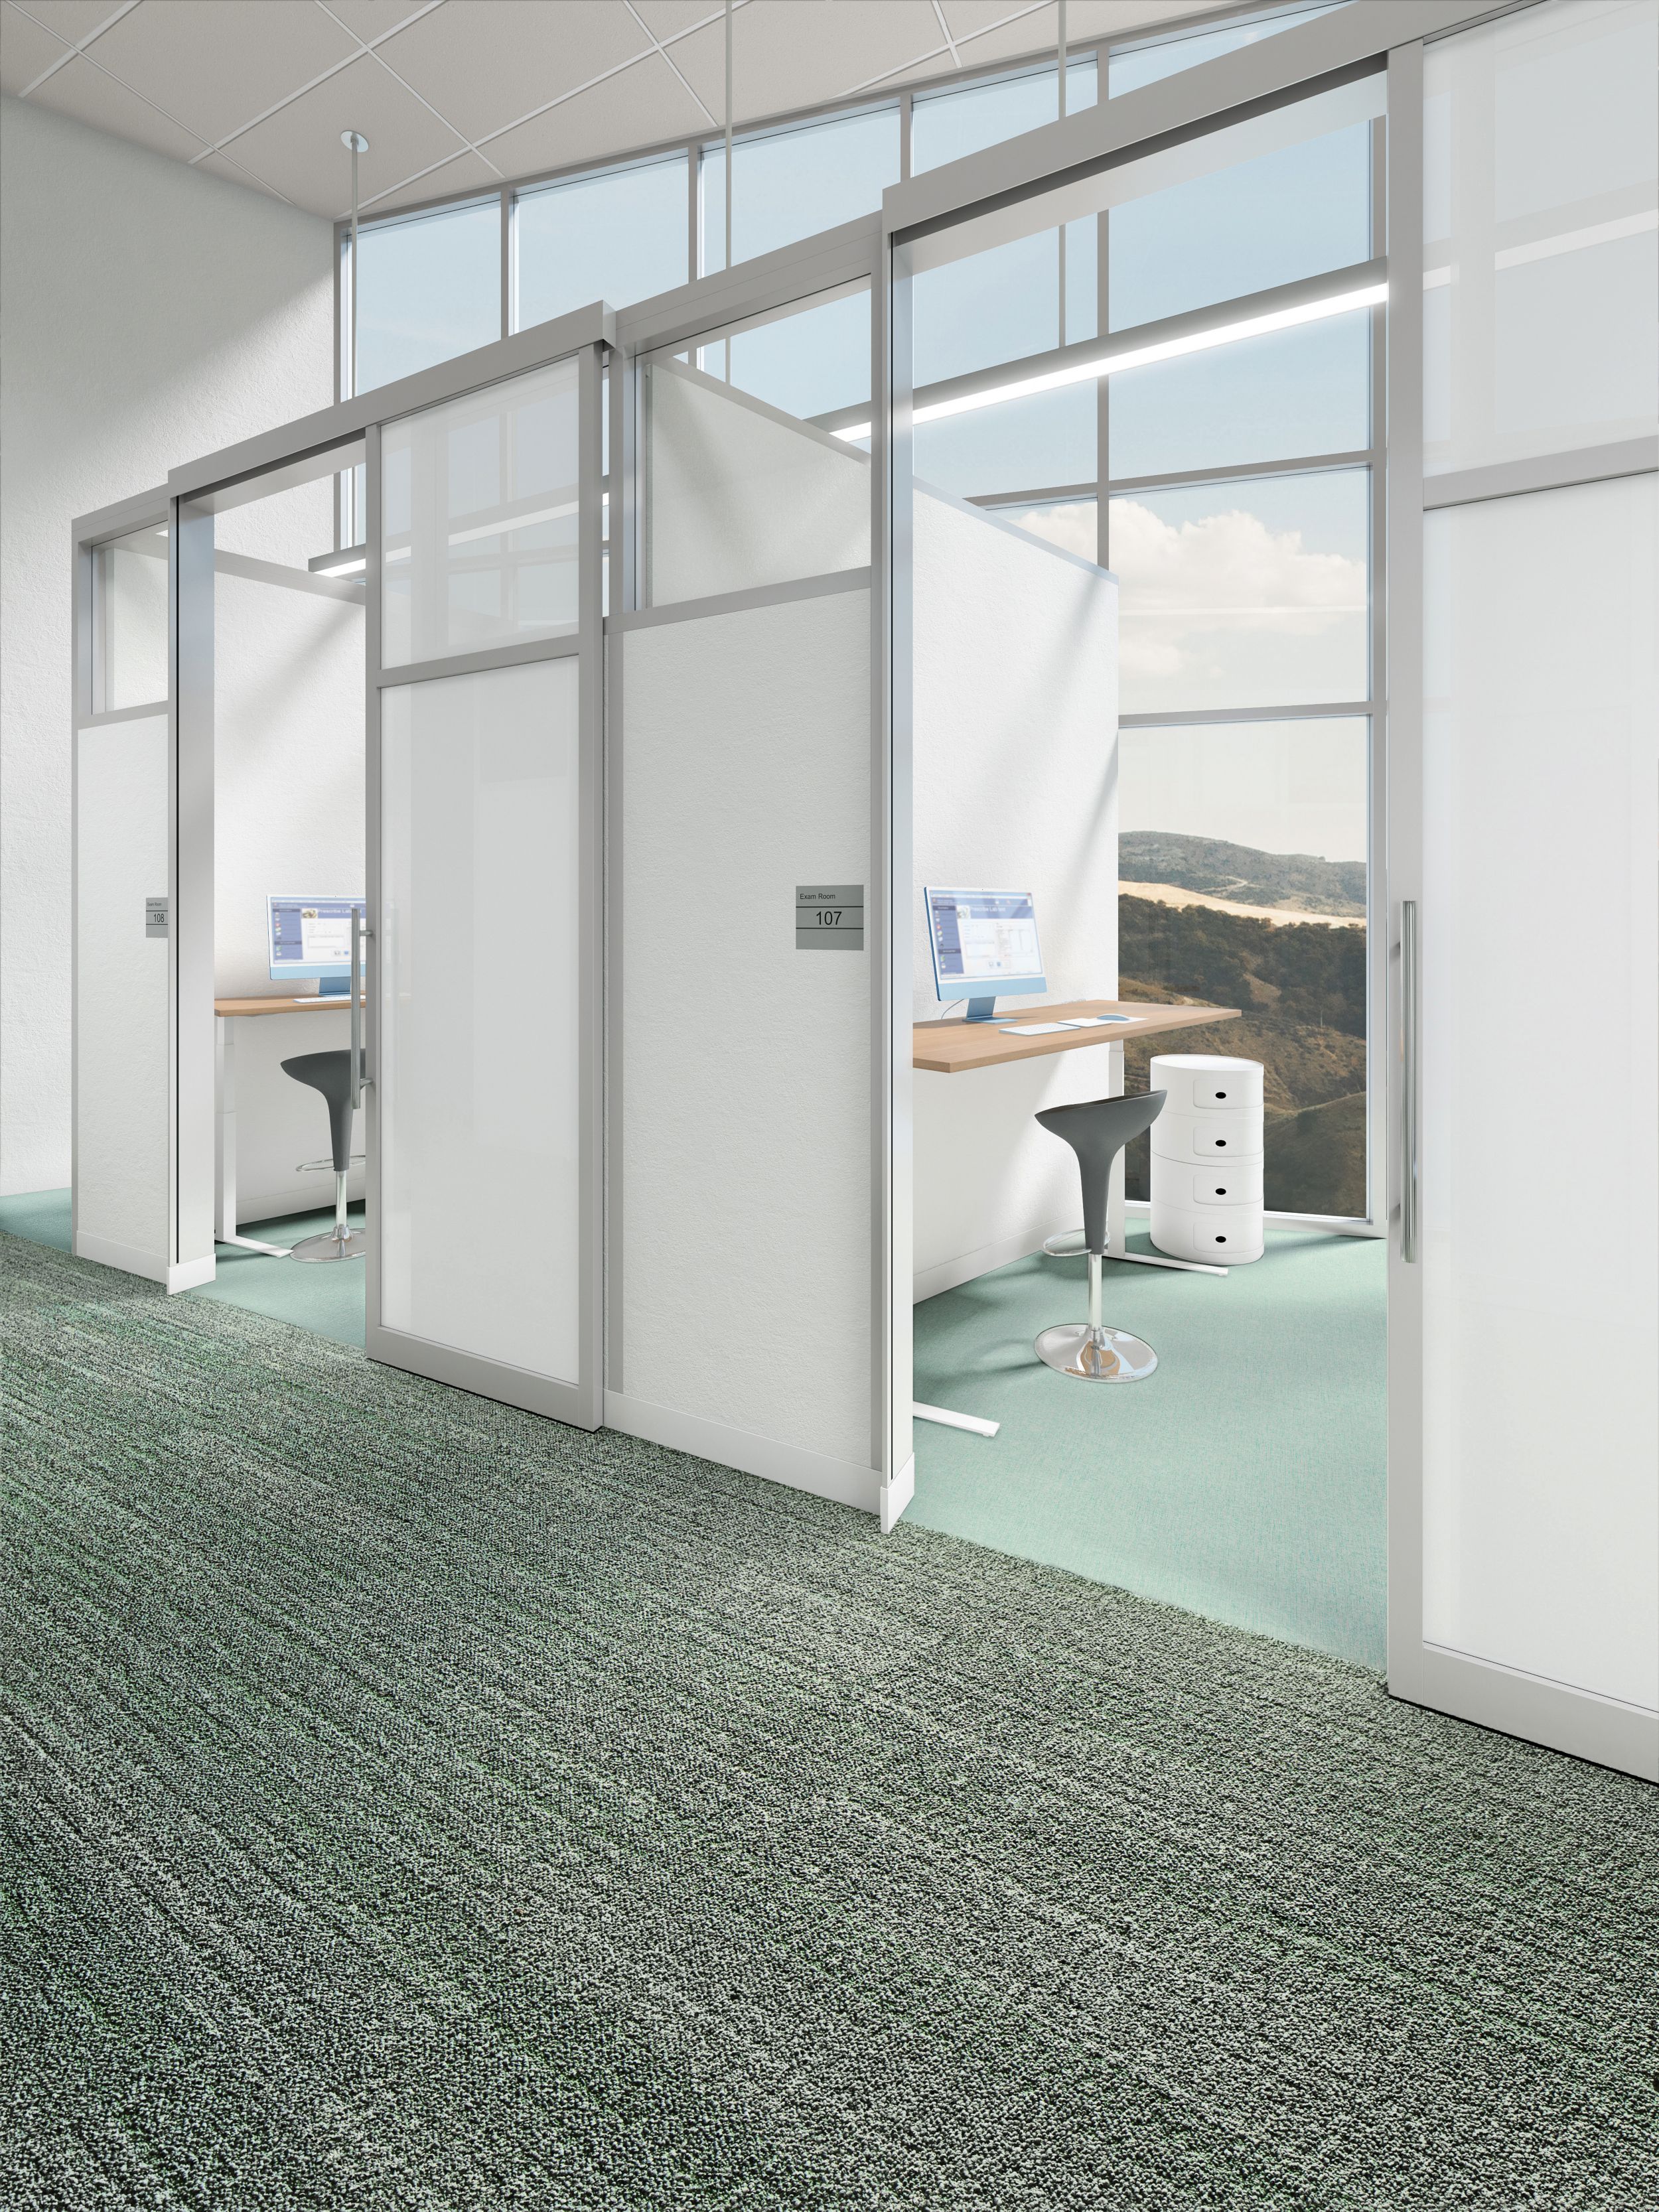 Interface Plant-astic LVT and Cactus Grooves plank carpet tile in hospital corridor and patient rooms imagen número 11